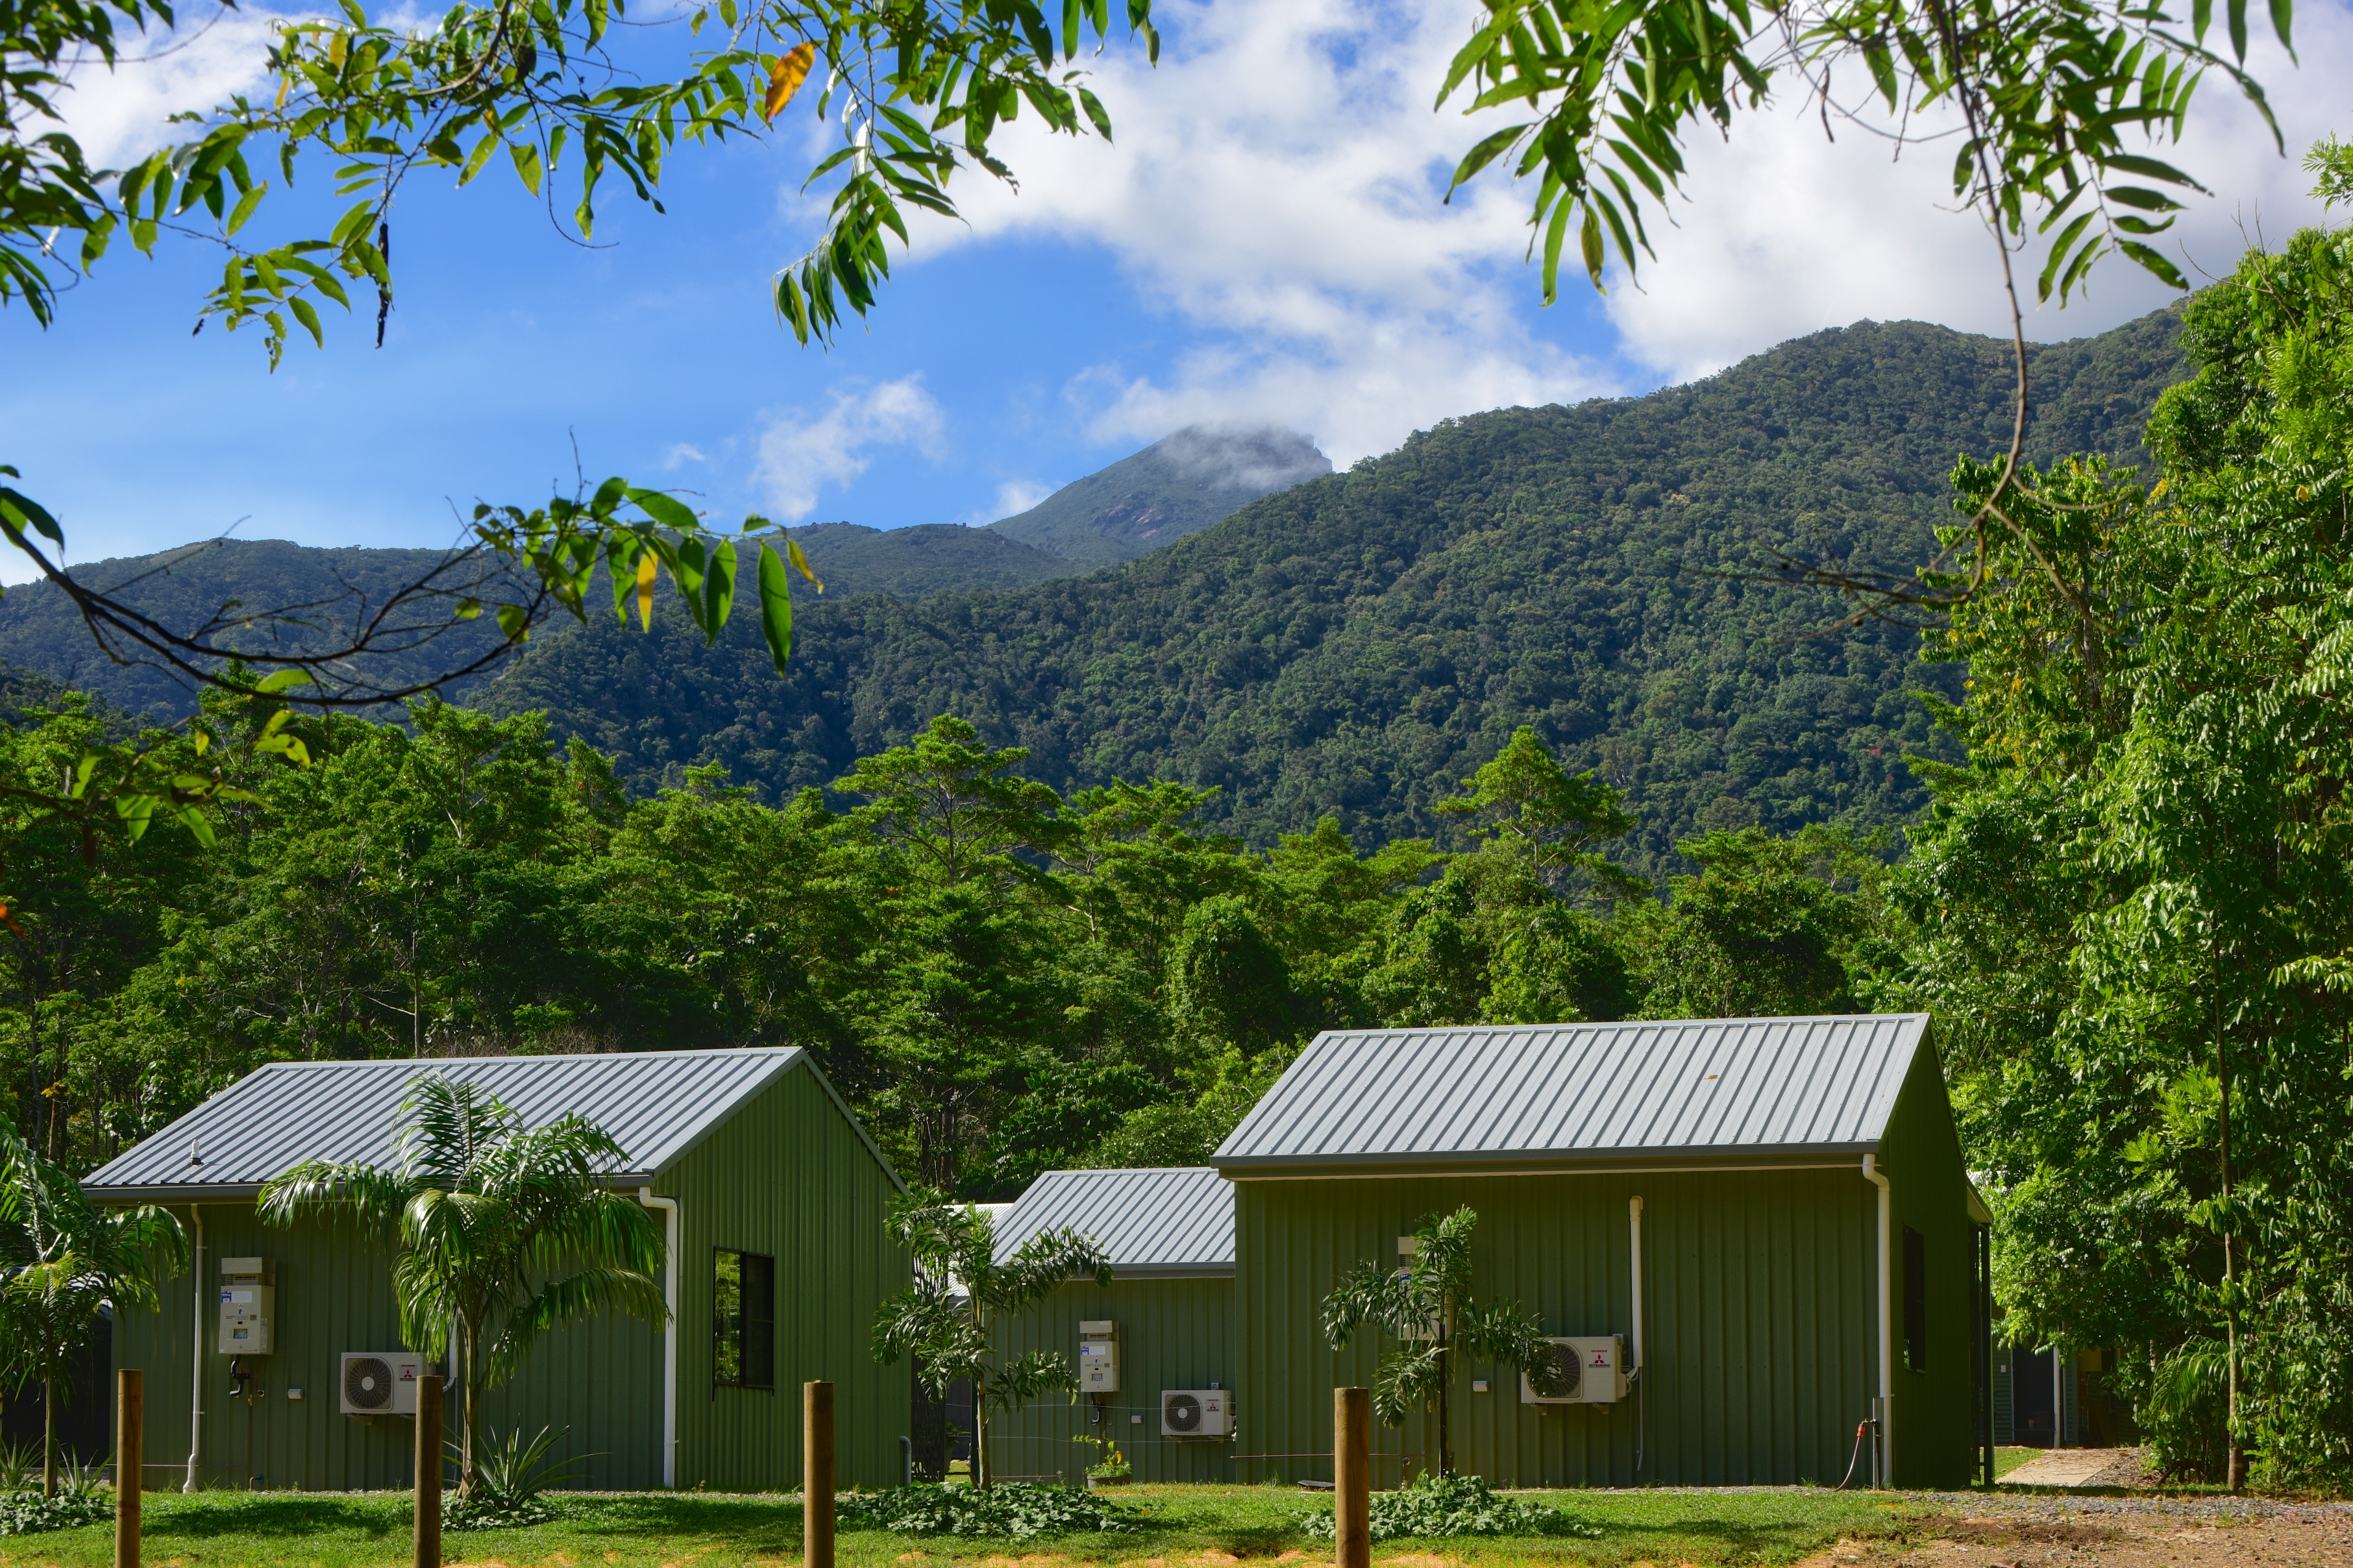 Eco chalets with the Thornton’s Peak in the back